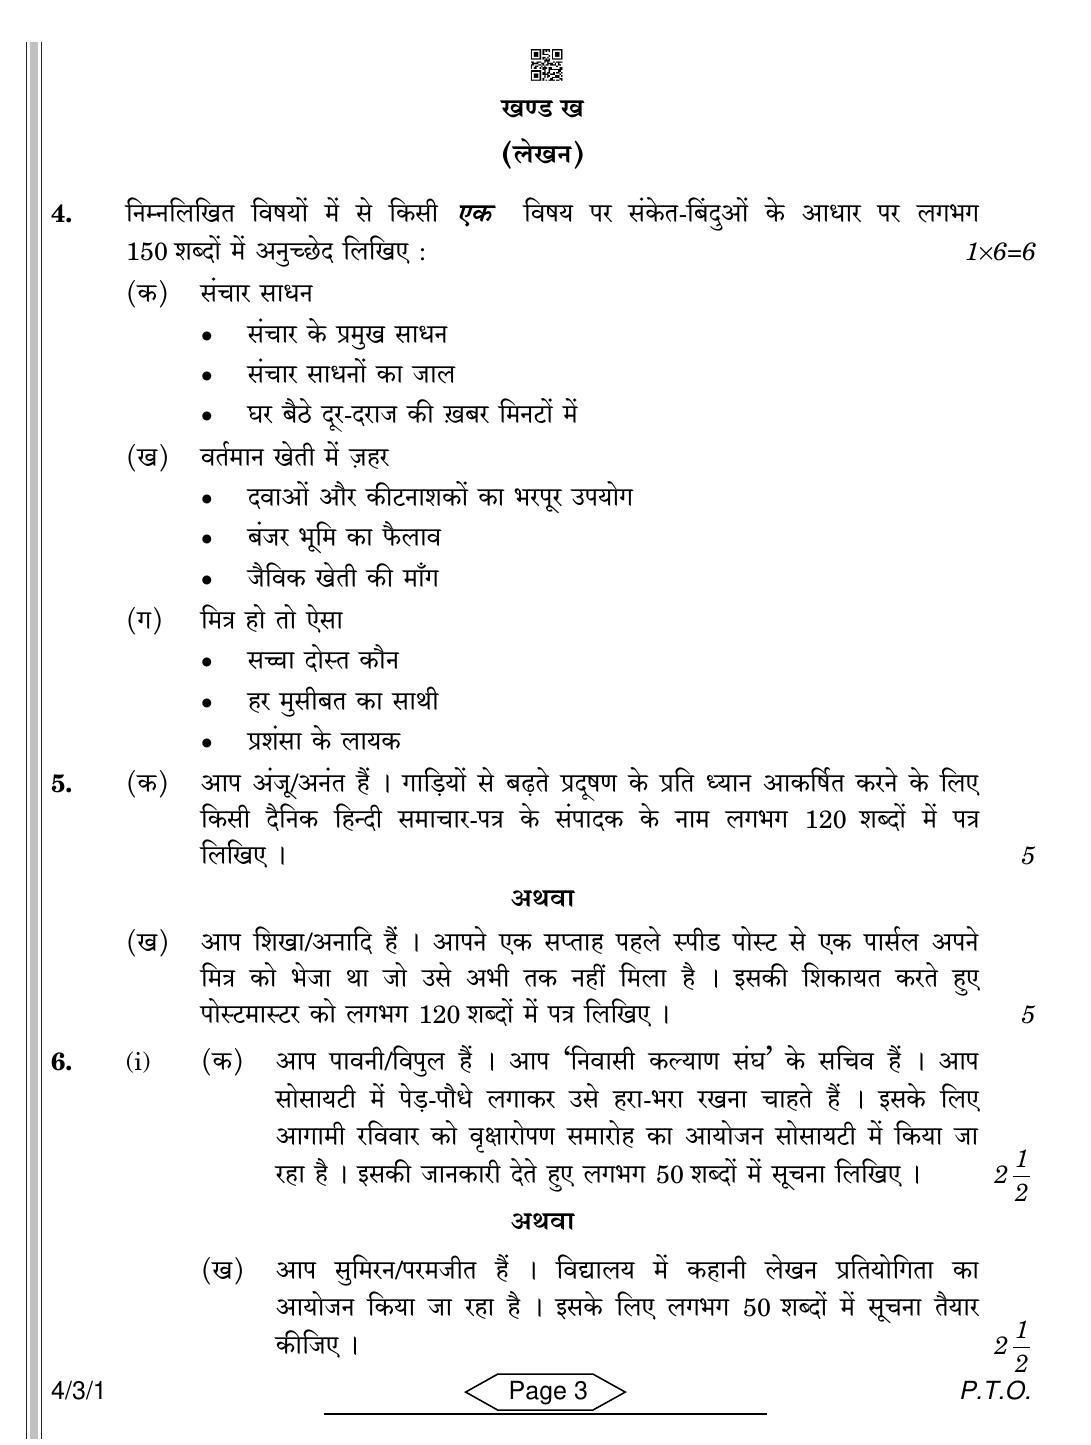 CBSE Class 10 4-3-1 Hindi B 2022 Question Paper - Page 3